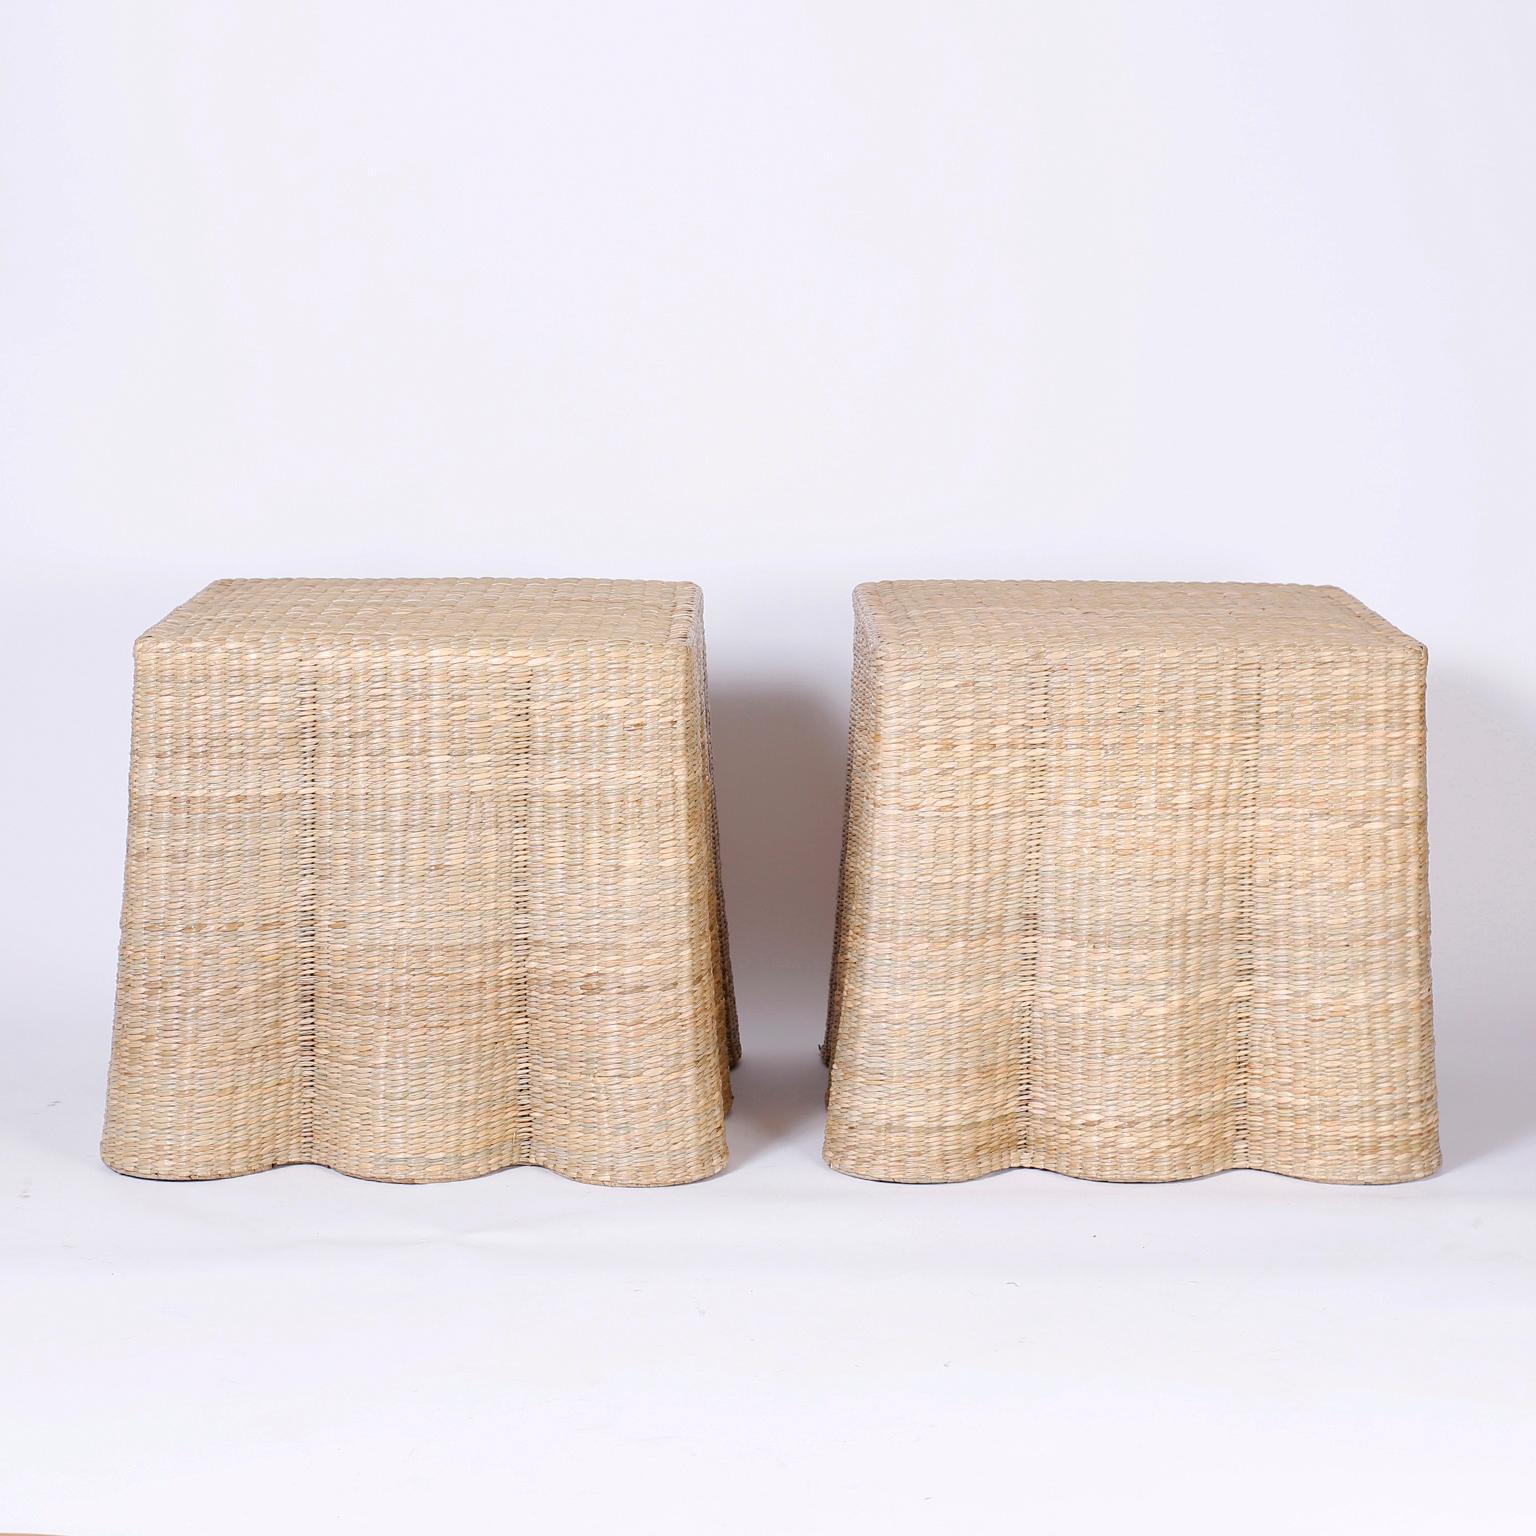 Pair of handmade wicker drapery ghost stands crafted in woven reed over a metal frame with the highest quality and perfect proportions from the FS Flores collection exclusively designed and sold by F. S. Henemader Antiques.